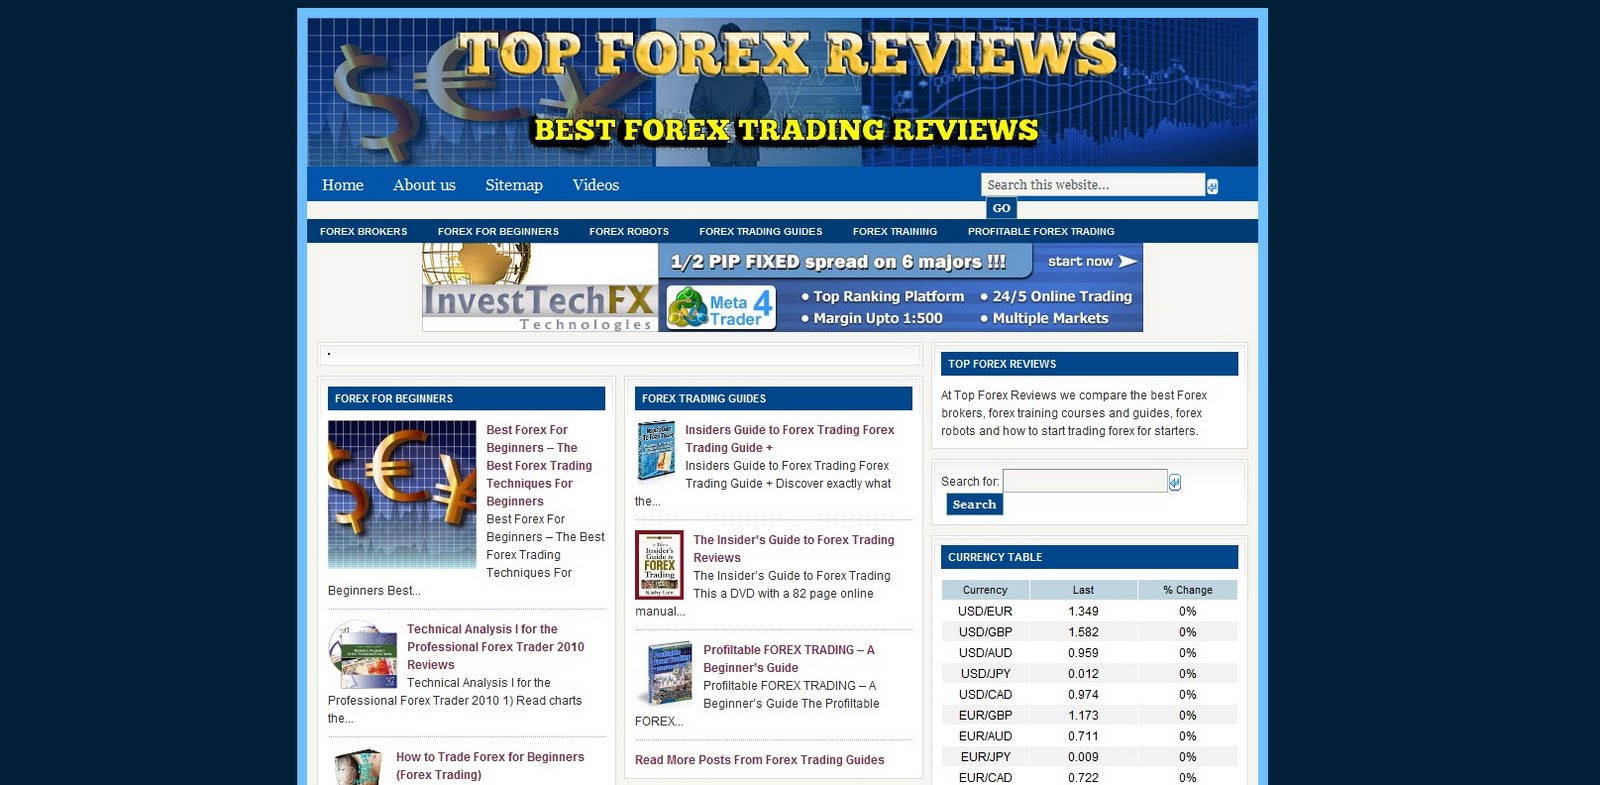 Best forex software trading reviews